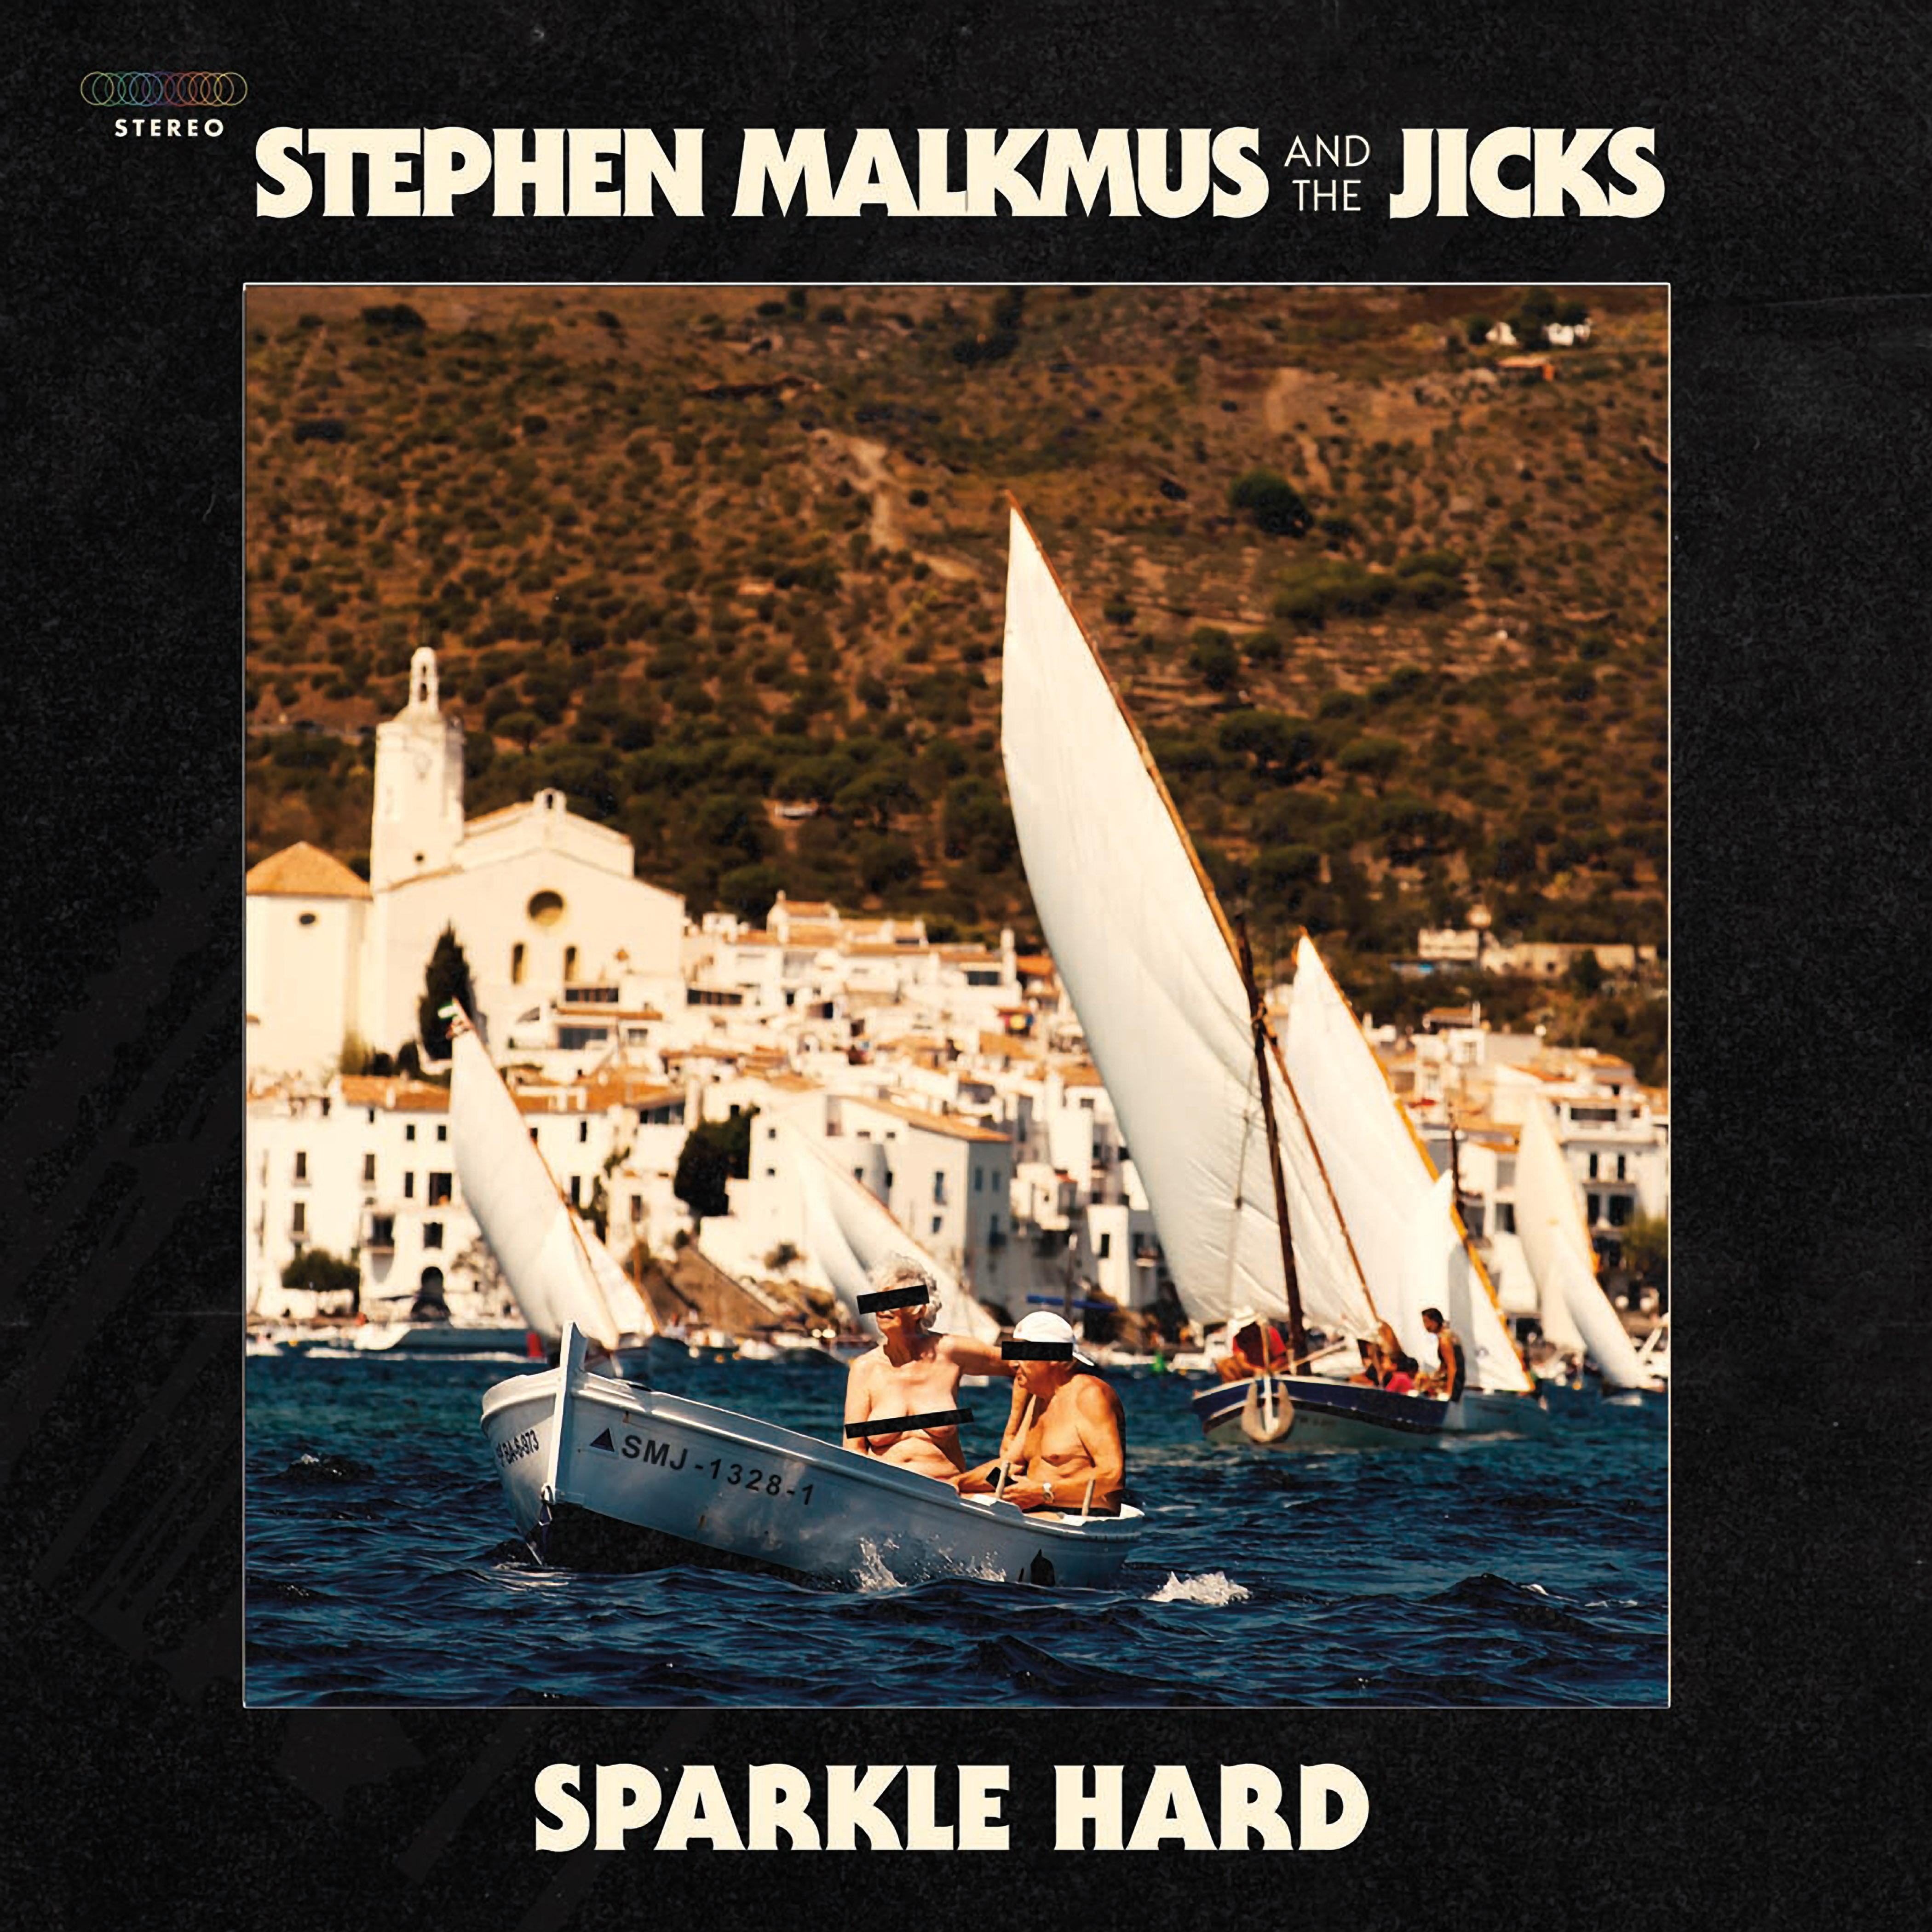 Stephen Malkmus and the Jicks Announce New Album <i></noscript>Sparkle Hard</i>, Release “Shiggy”” title=”11183_JKT” data-original-id=”283384″ data-adjusted-id=”283384″ class=”sm_size_full_width sm_alignment_center ” data-image-source=”professional” />
<p>1. Cast Off<br />
2. Future Suite<br />
3. Solid Silk<br />
4. Bike Lane<br />
5. Middle America<br />
6. Rattler<br />
7. Shiggy<br />
8. Kite<br />
9. Brethren<br />
10. Refute (ft. Kim Gordon)<br />
11. Difficulties / Let Them Eat Vowels</p>
<p>Tour Dates:<br />
6/1/18 – St. Paul, MN – Turf Club SOLD OUT<br />
6/2/18 – Milwaukee, WI – The Back Room at Colectivo SOLD OUT<br />
6/3/18 – Chicago, IL – Thalia Hall<br />
6/5/18 – Columbus, OH – Ace of Cups SOLD OUT<br />
6/6/18 – Pittsburgh, PA – Rex Theater<br />
6/7/18 – Cleveland, OH – Grog Shop<br />
6/8/18 – Detroit, MI – Magic Stick<br />
6/9/18 – Toronto, ON – Lee’s Palace SOLD OUT<br />
6/11/18 – Montreal, QC – Theatre Fairmount<br />
6/12/18 – Cambridge, MA – The Sinclair SOLD OUT<br />
6/14/18 – Brooklyn, NY – Music Hall of Williamsburg SOLD OUT<br />
6/15/18 – Brooklyn, NY – Music Hall of Williamsburg SOLD OUT<br />
6/16/18 – Philadelphia, PA – Theatre of Living Arts<br />
6/17/18 – Washington, DC – Black Cat<br />
6/19/18 – Carrboro, NC – Cat’s Cradle<br />
6/20/18 – Athens, GA – The Georgia Theatre<br />
6/21/18 – Nashville, TN – Mercy Lounge<br />
6/22/18 – Louisville, KY – Zanzabar<br />
6/23/18 – Cincinnati, OH – The Woodward Theater<br />
7/17/18 – Petaluma, CA – Mystic Theatre<br />
7/18/18 – San Francisco, CA – Slim’s<br />
7/22/18 – Phoenix, AZ – The Crescent Ballroom<br />
7/23/18 – Albuquerque NM – Launchpad<br />
7/25/18 – Austin, TX – The Mohawk<br />
7/26/18 – Houston, TX – White Oak Music Hall<br />
7/27/18 – Dallas, TX – Granada Theater<br />
7/28/18 – Tulsa, OK – The Vanguard<br />
7/29/18 – Kansas City, MO – Record Bar<br />
7/31/18 – Englewood, CO – Gothic Theatre<br />
8/1/18 – Salt Lake City, UT – Urban Lounge<br />
8/3/18 – Vancouver, BC – Rickshaw Theatre<br />
8/4/18 – Seattle, WA – Neptune Theatre</p>
</div>
</div>
</div>
</div>
</div>
</section>
<section data-particle_enable=